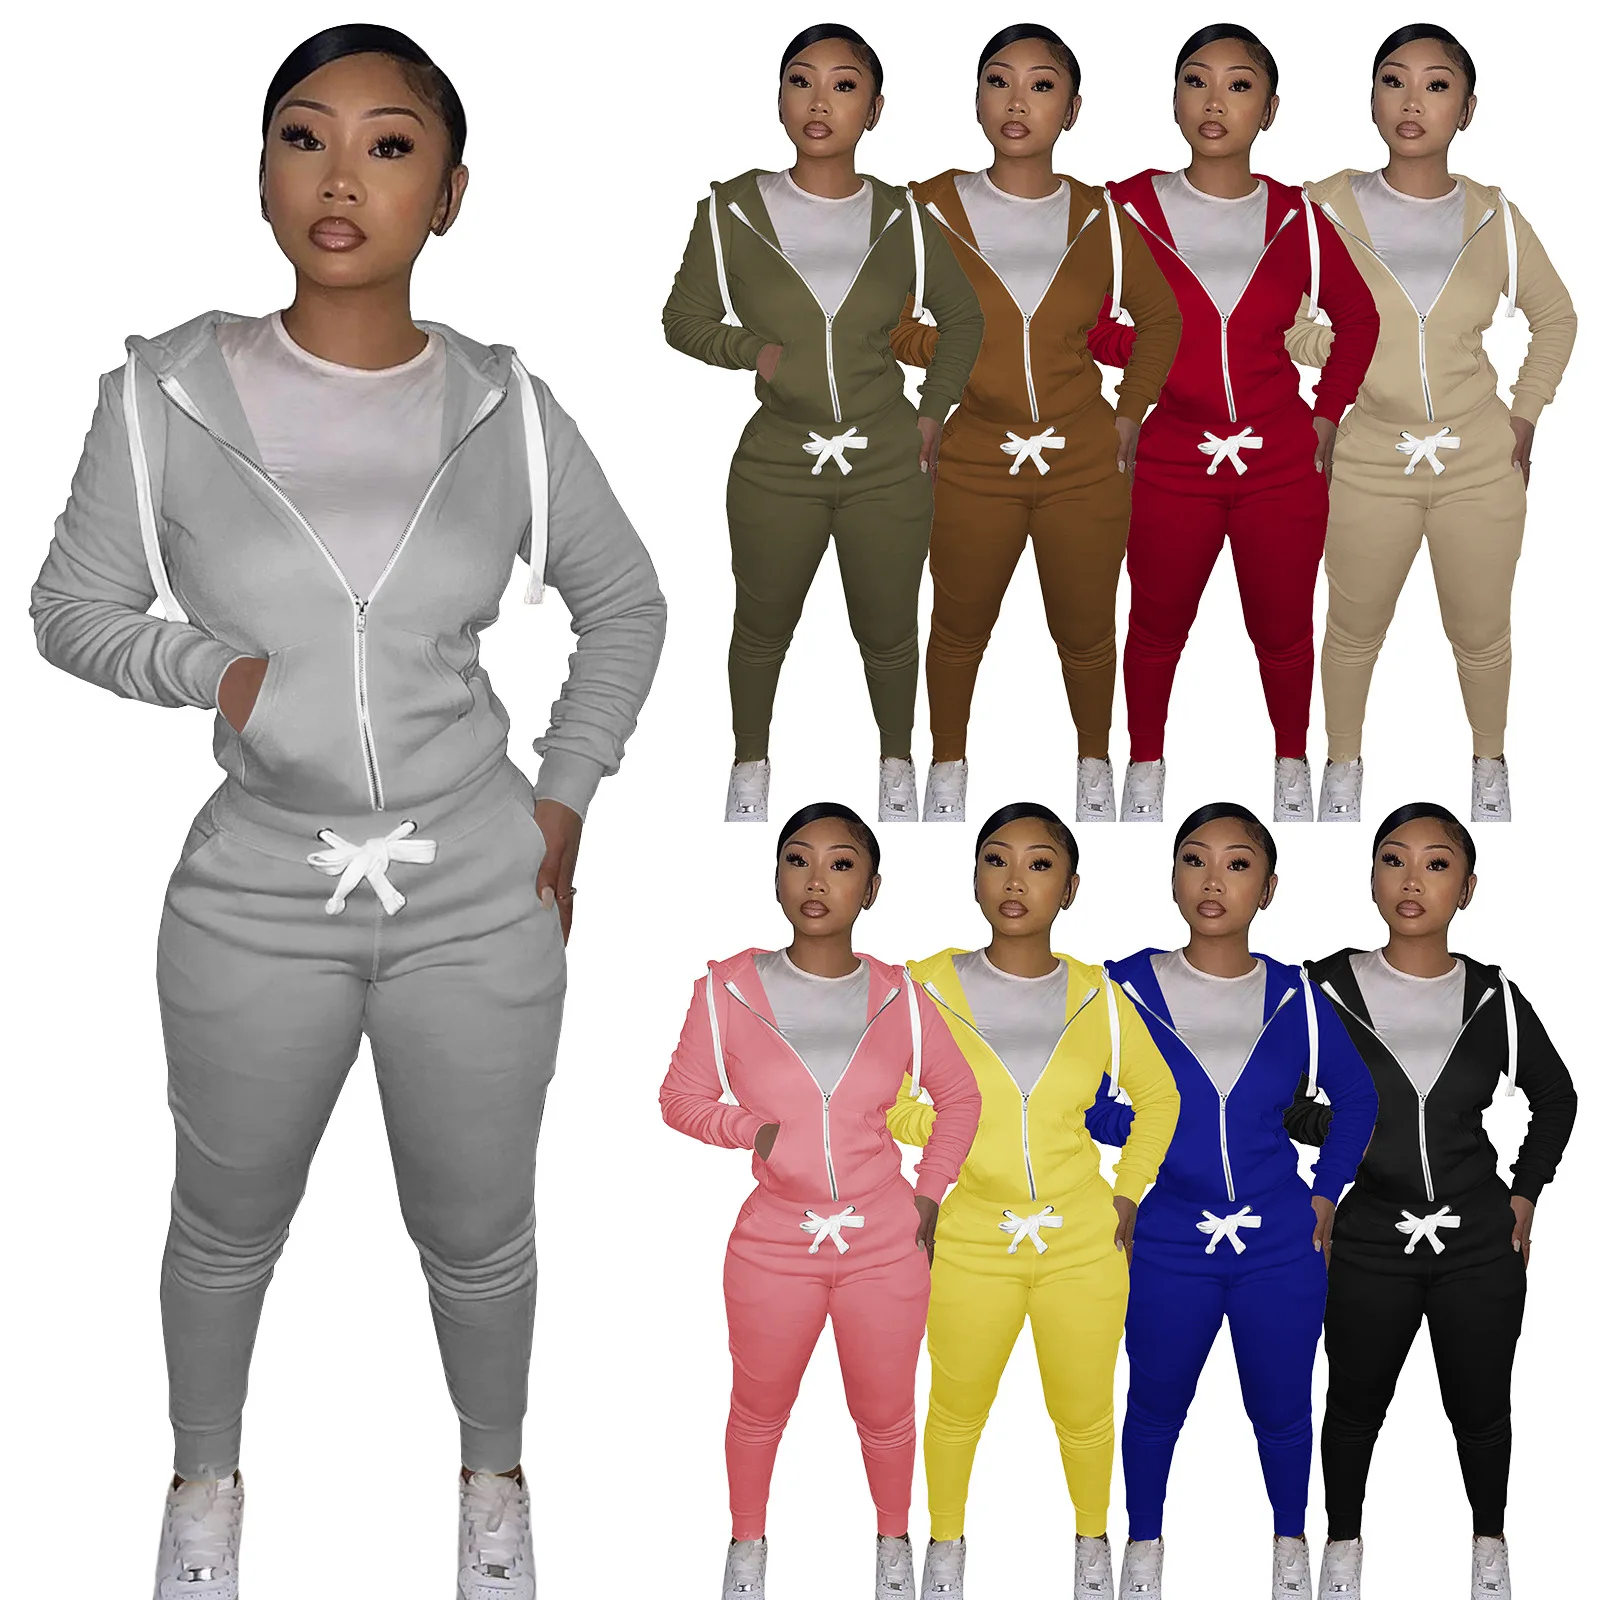 

Summer Casual Comfy Lounge Sleep Pj Clothes Mock Neck Ladies 2ps Sets Two Piece Sweater Set Sweat Suits Short Pants For Women, Gray,pink,yellow,black,khaki,army green,deep blue,wine red,coffee